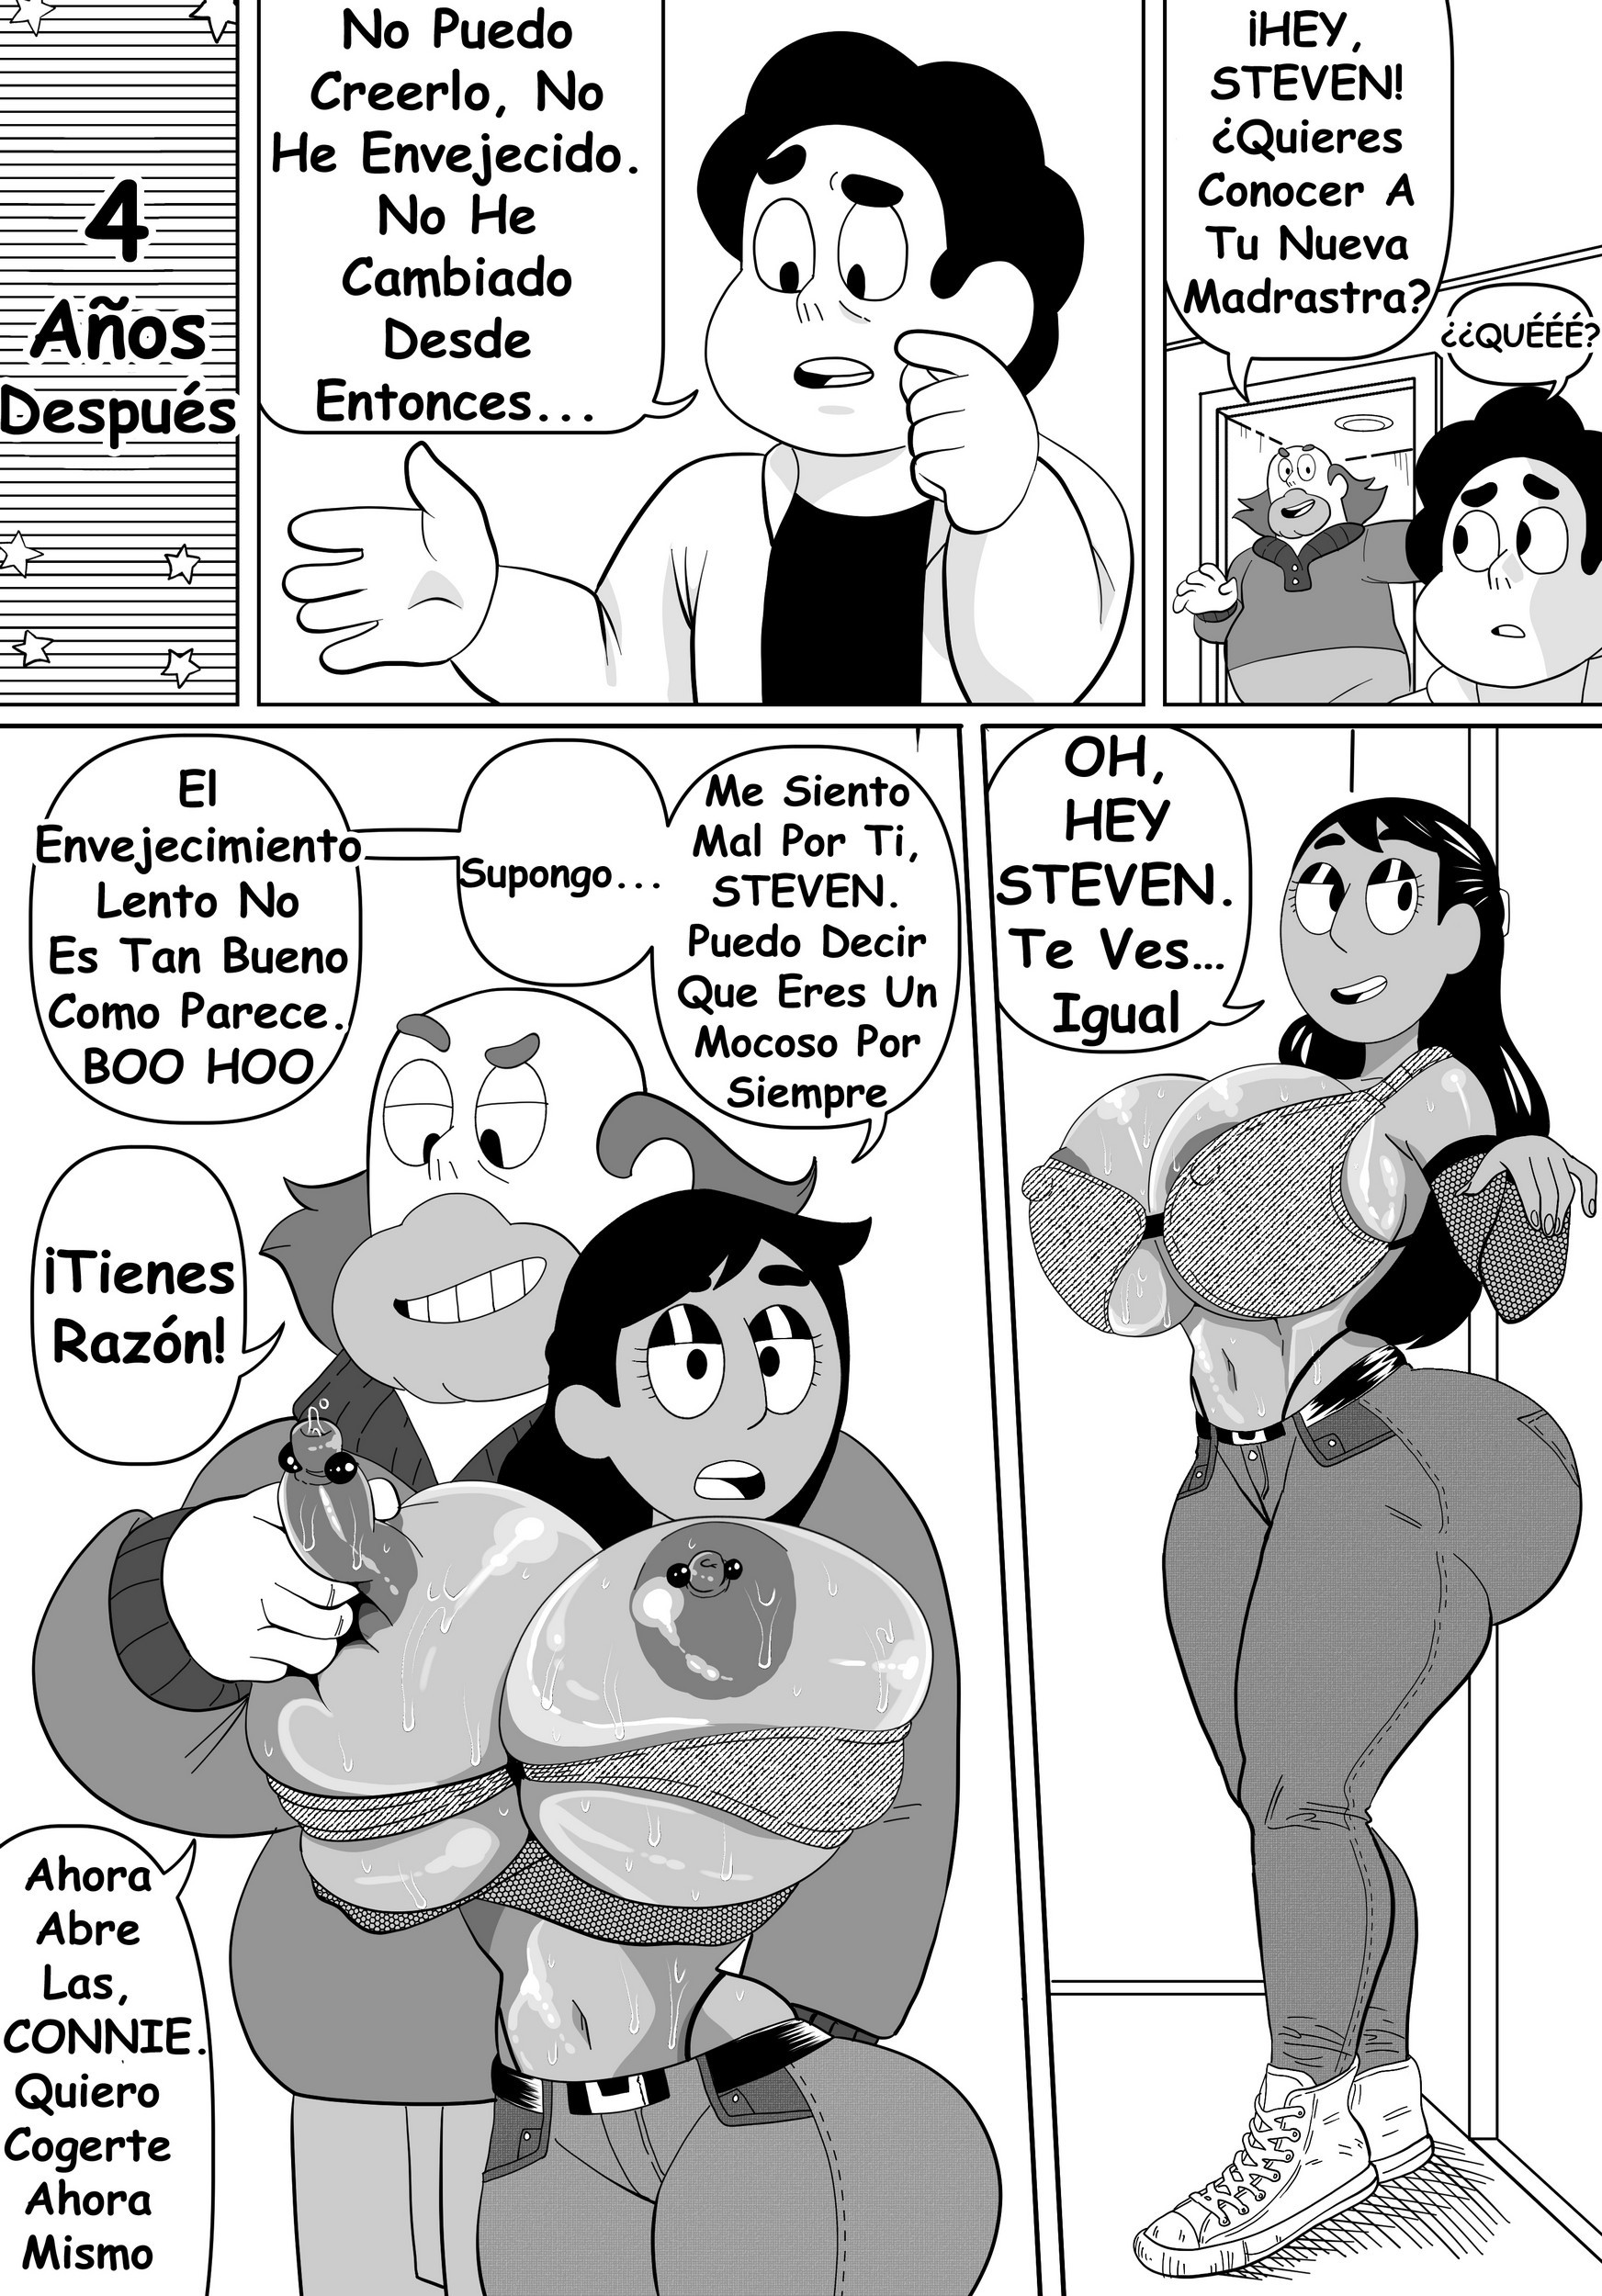 [DoompyPomp] Connie and Greg (and Steven!) - 9